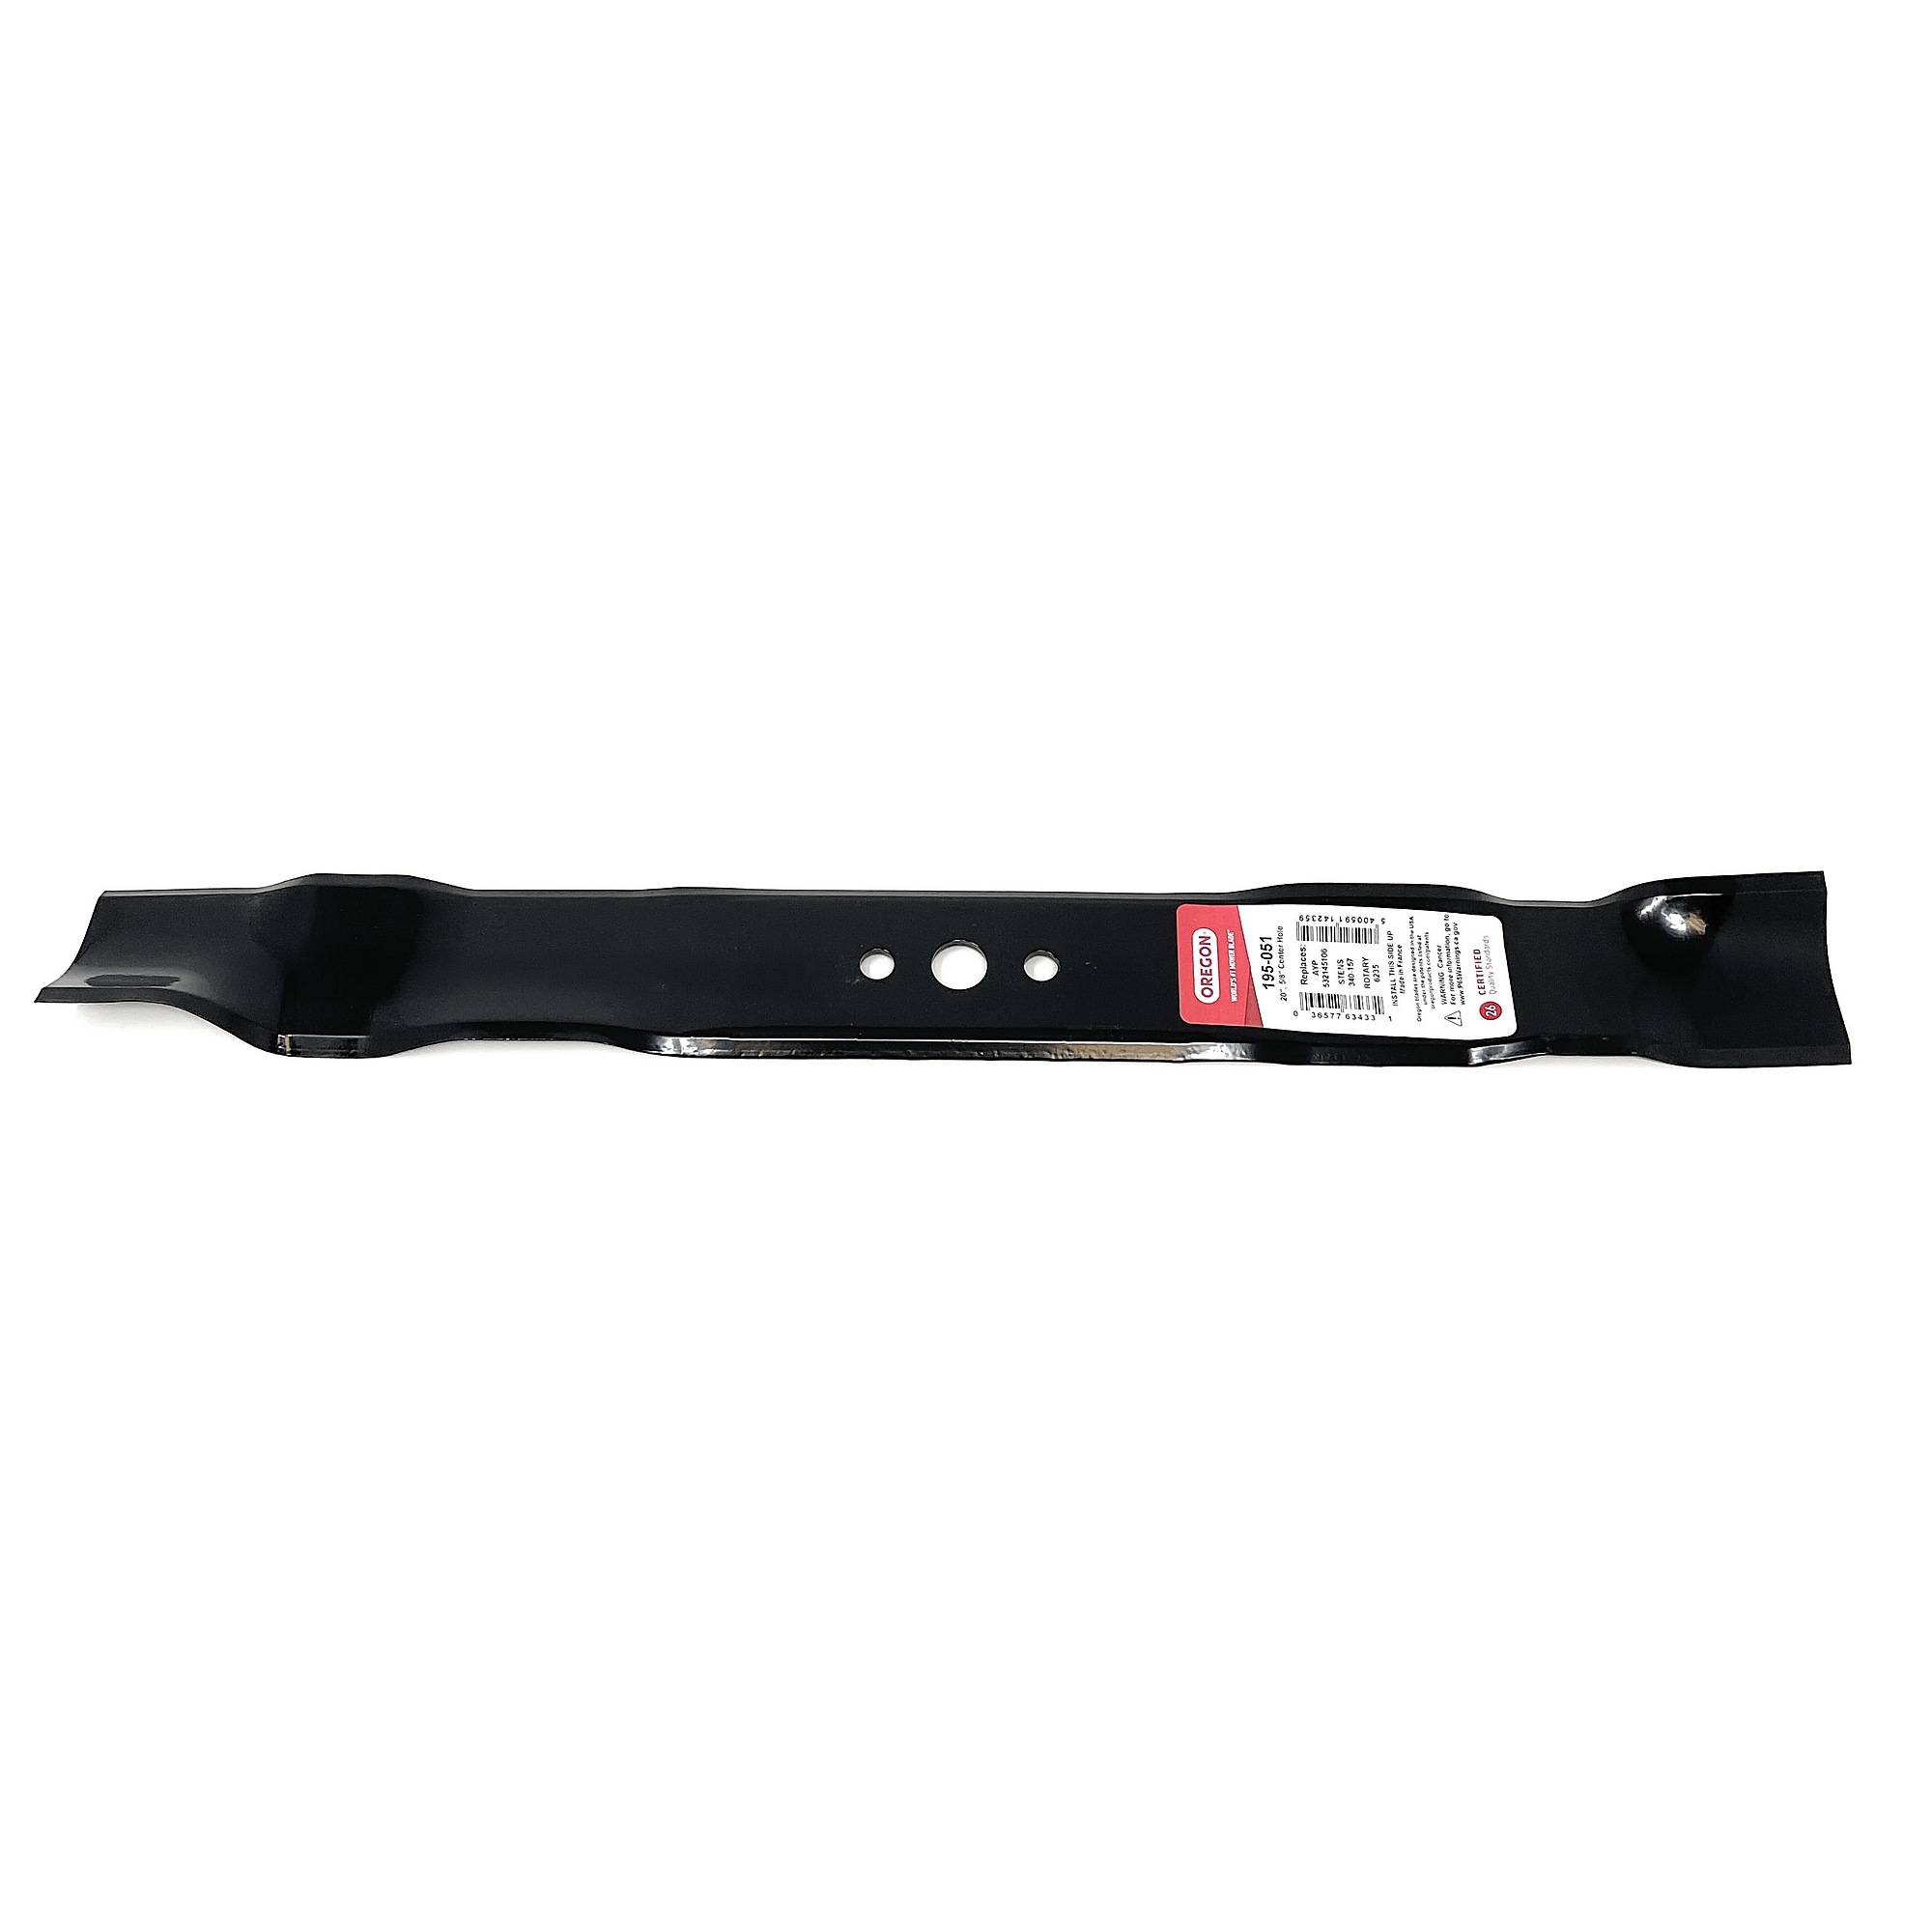 Replacement Lawn Mower Blade, Mulching, Length 20 in, Model - Oregon 195-051